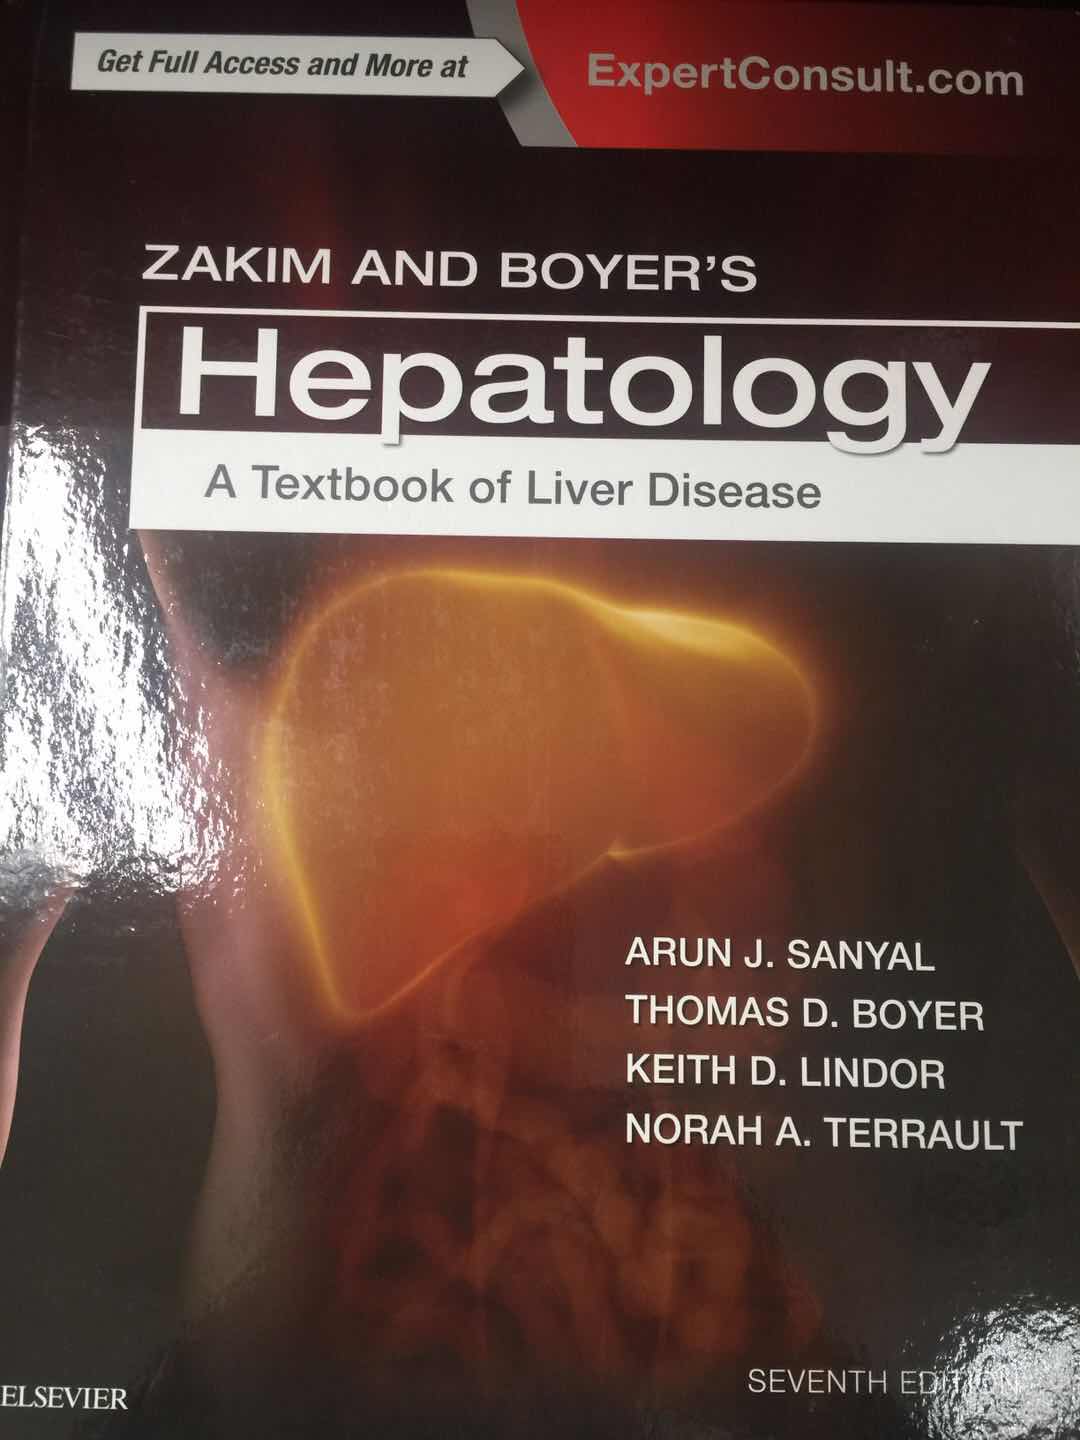 《Zakim and Boyer's Hepatology：A Textbook of Liver Disease 》